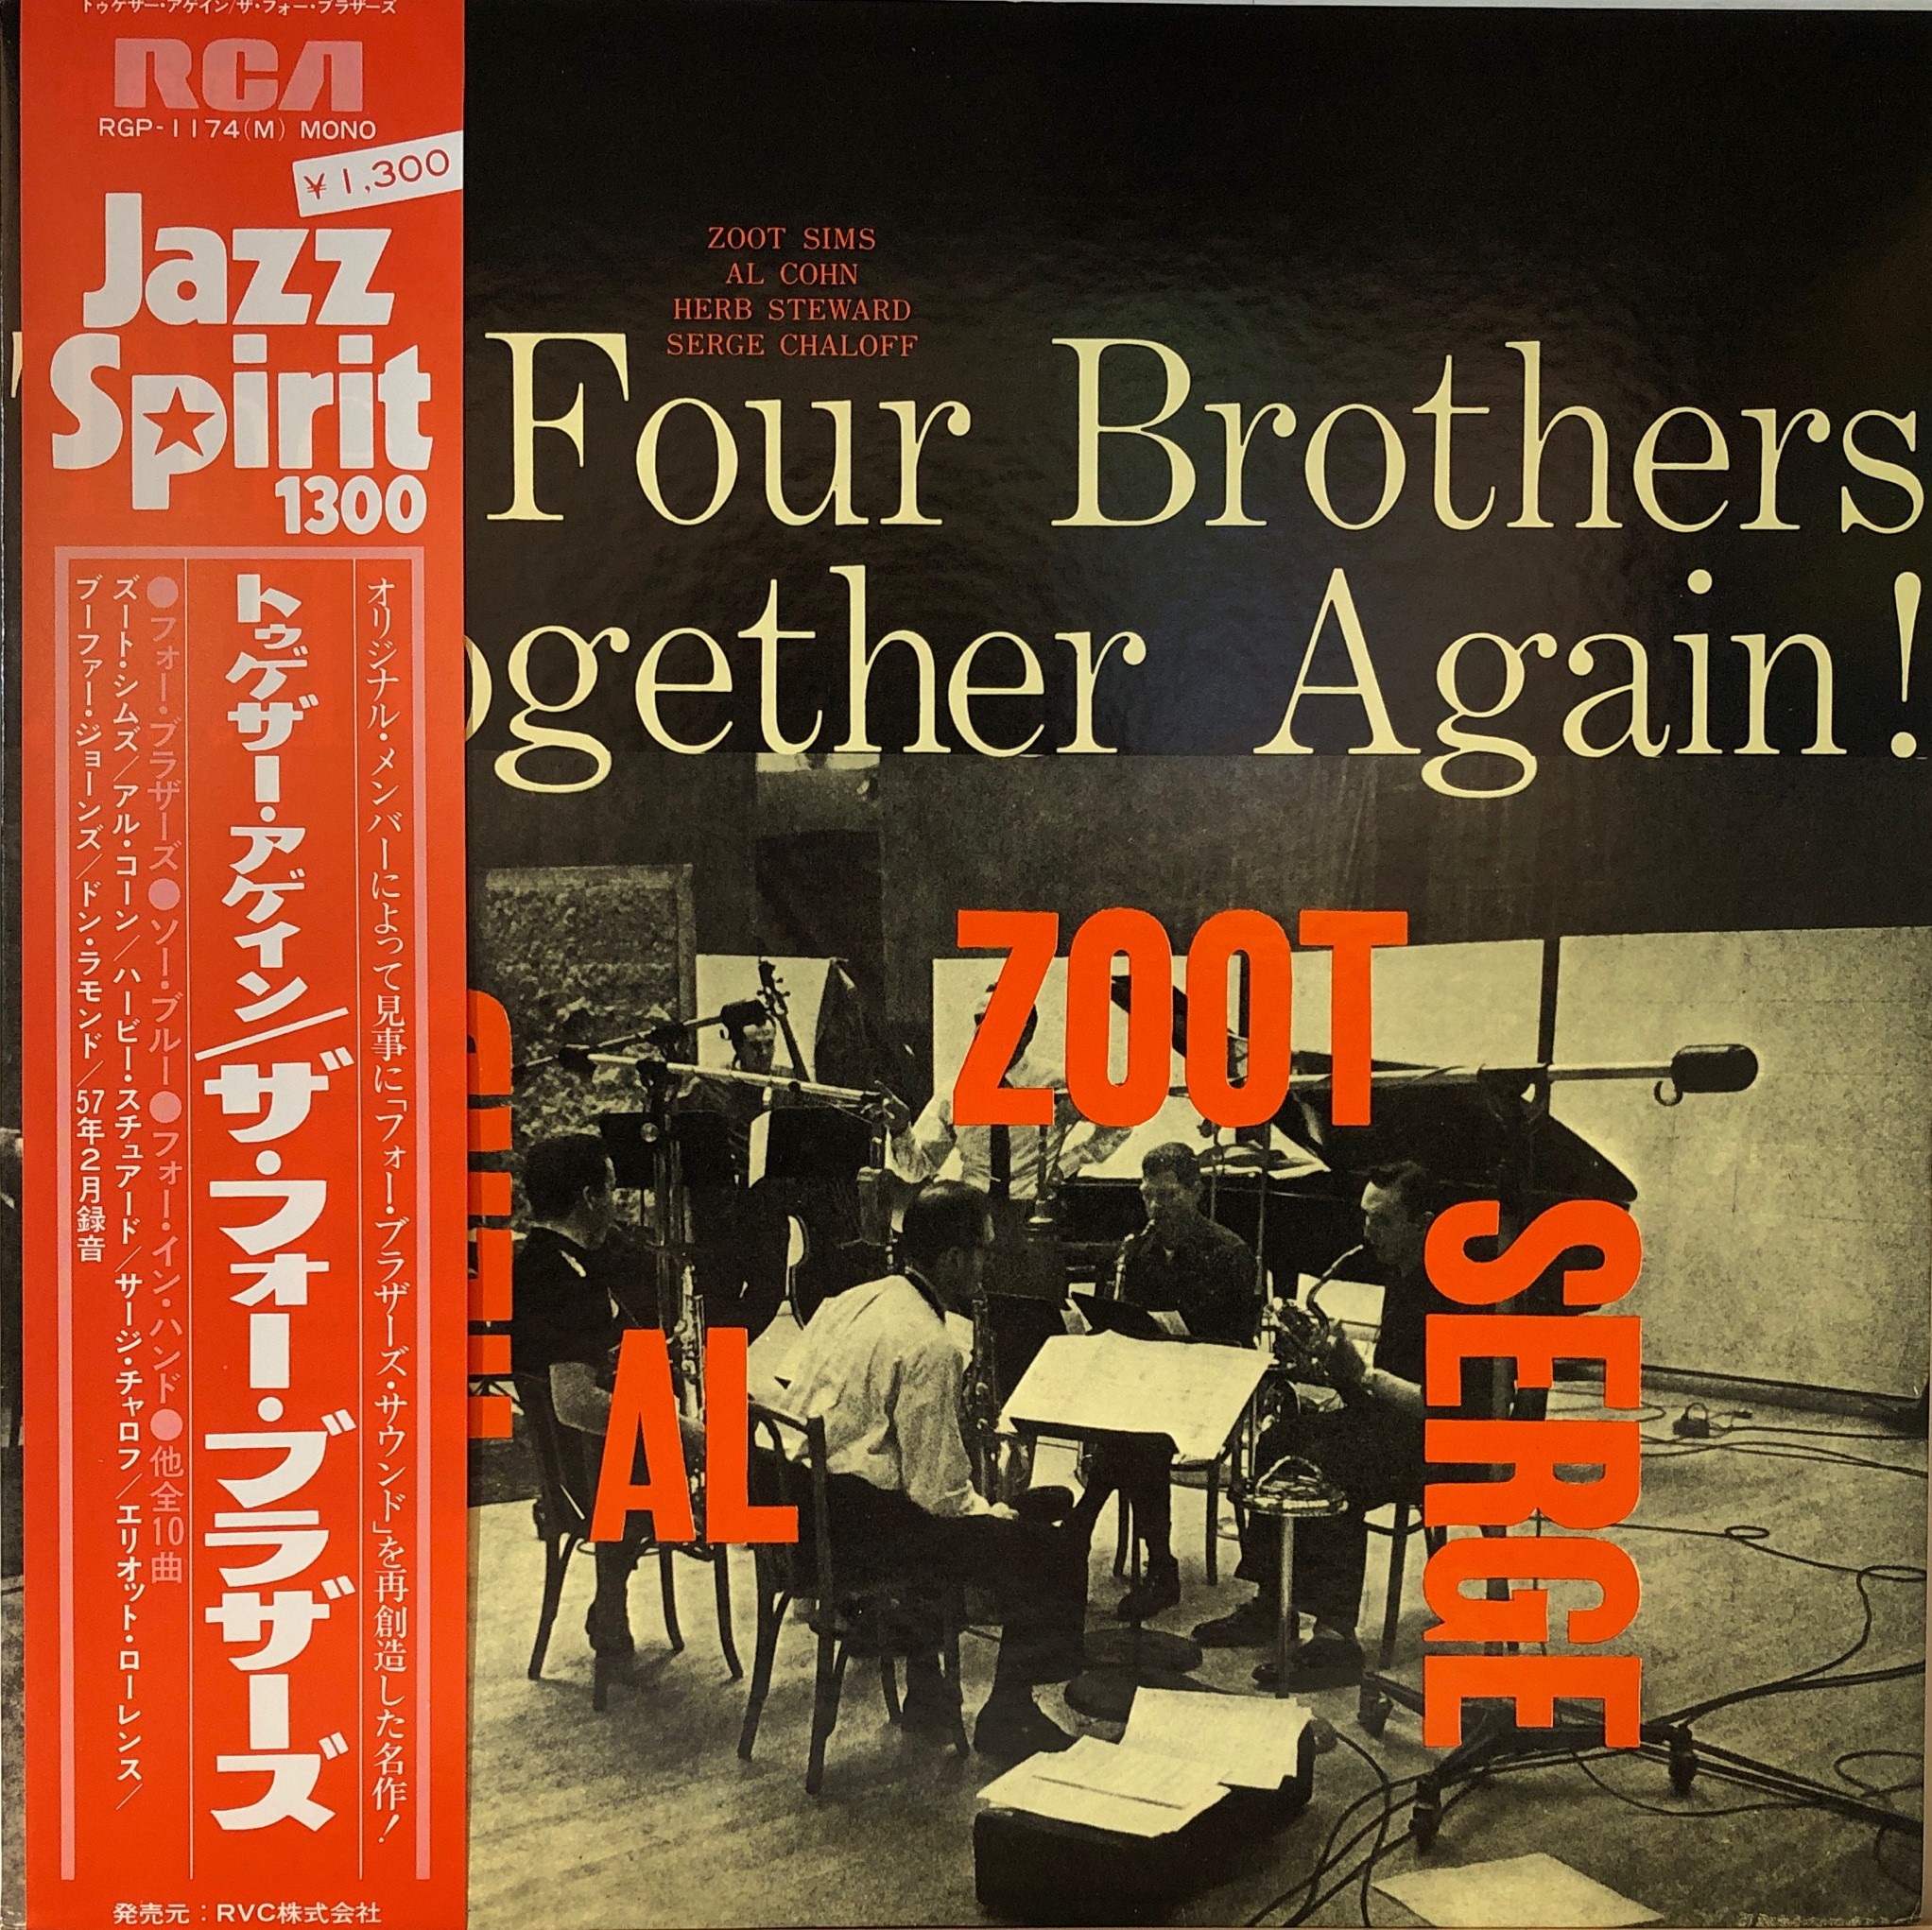 The Four Brothers . Together Again ! | 中古レコード通販・買取の 